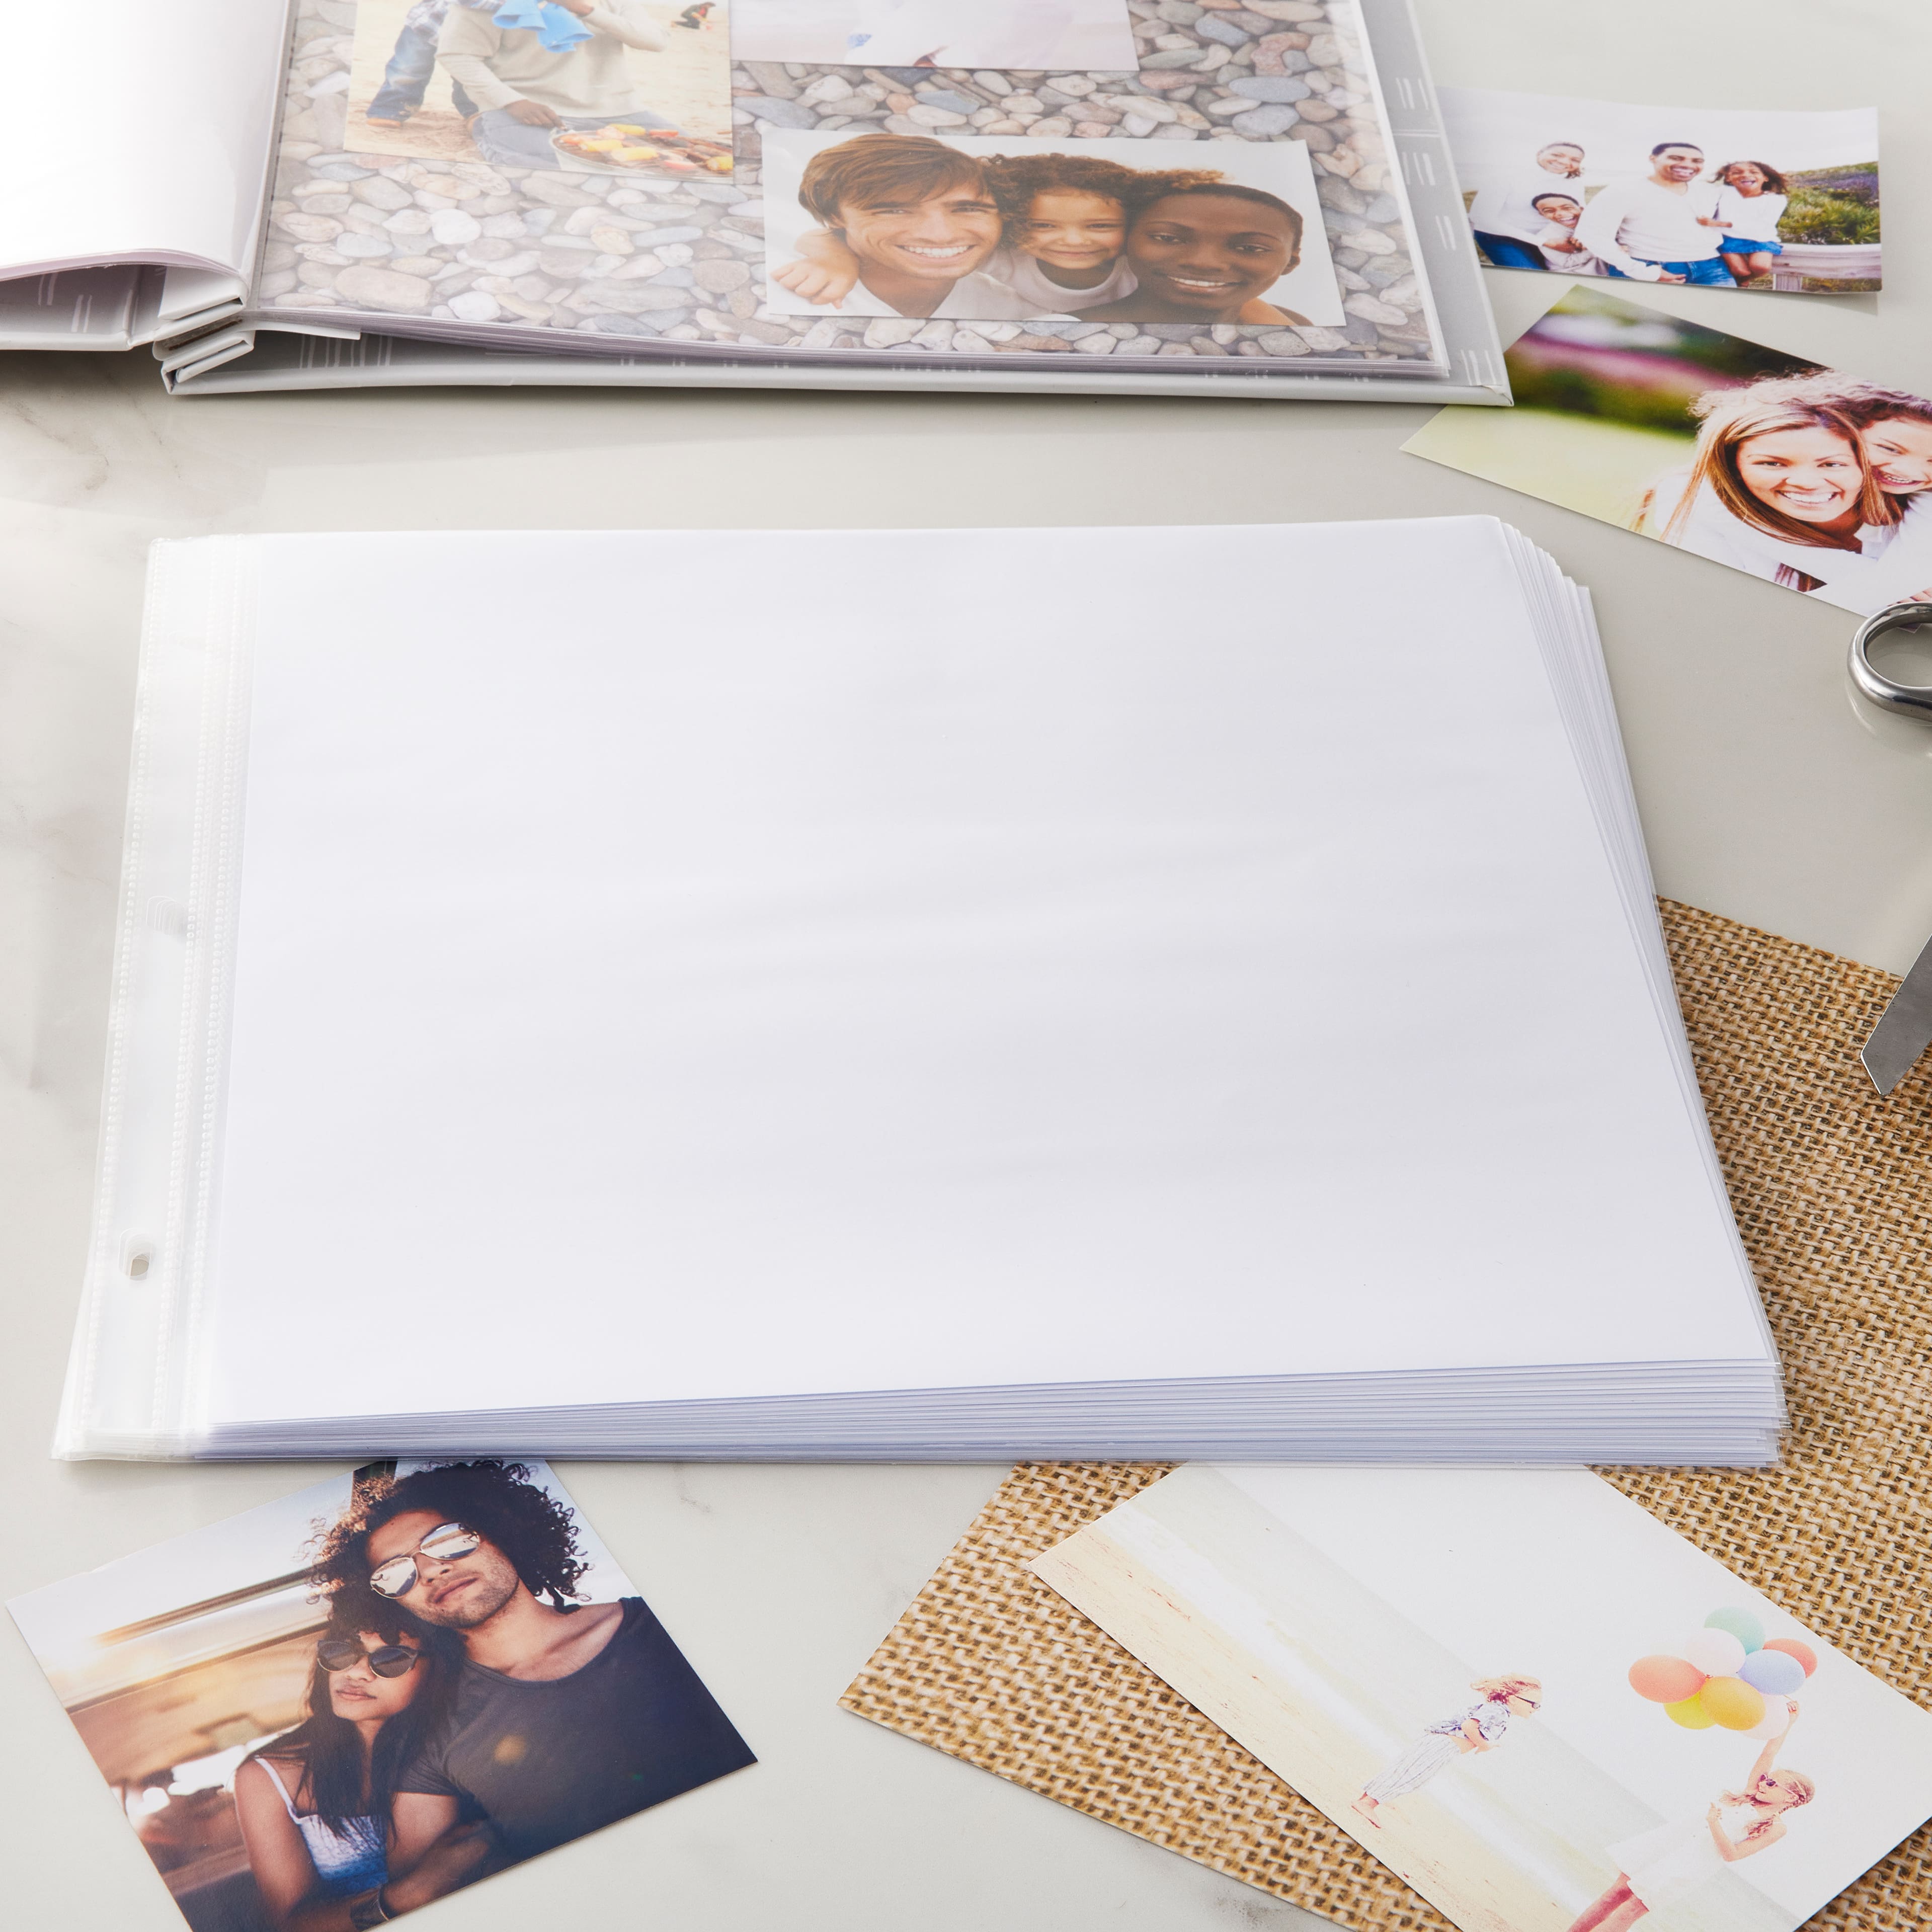 6 Packs: 20 ct. (120 total) 12&#x22; x 12&#x22; White Scrapbook Refill Pages by Recollections&#x2122;